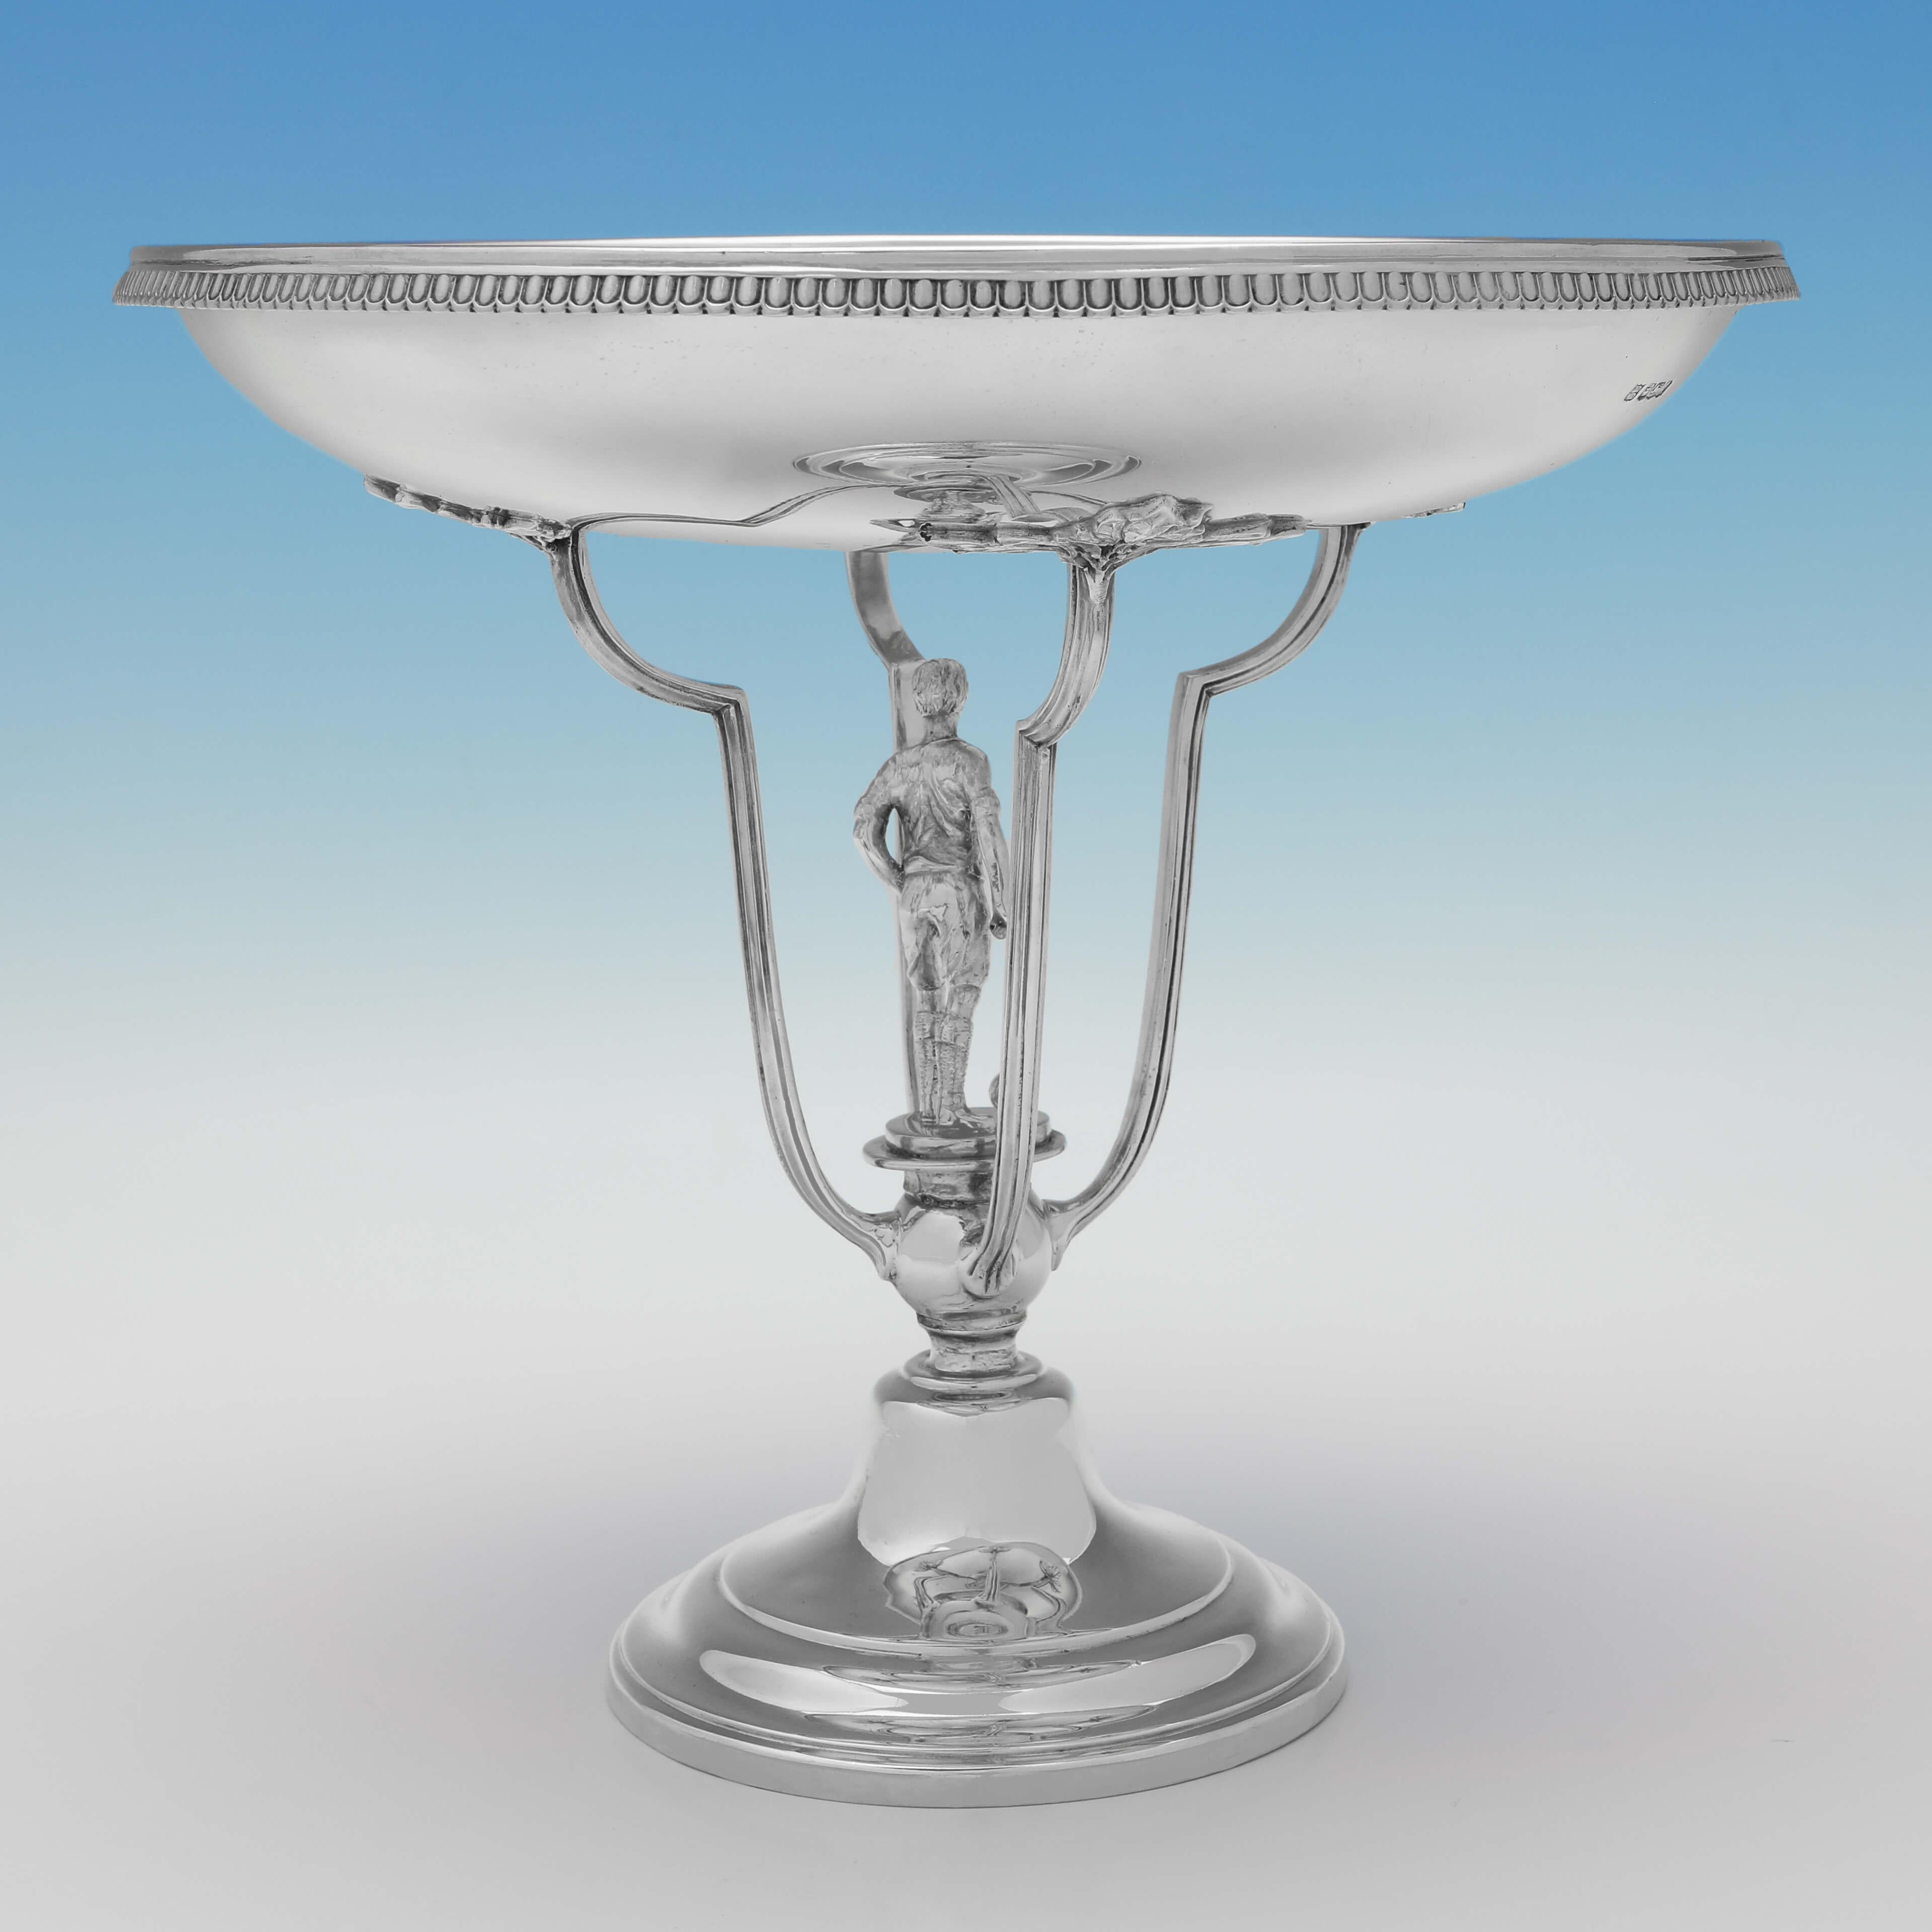 Hallmarked in Sheffield in 1927 by John & William Deakin, this handsome, Sterling Silver Football Trophy, is in the Art Deco taste, and features a cast model of a footballer under the dish. The trophy measures 8.5